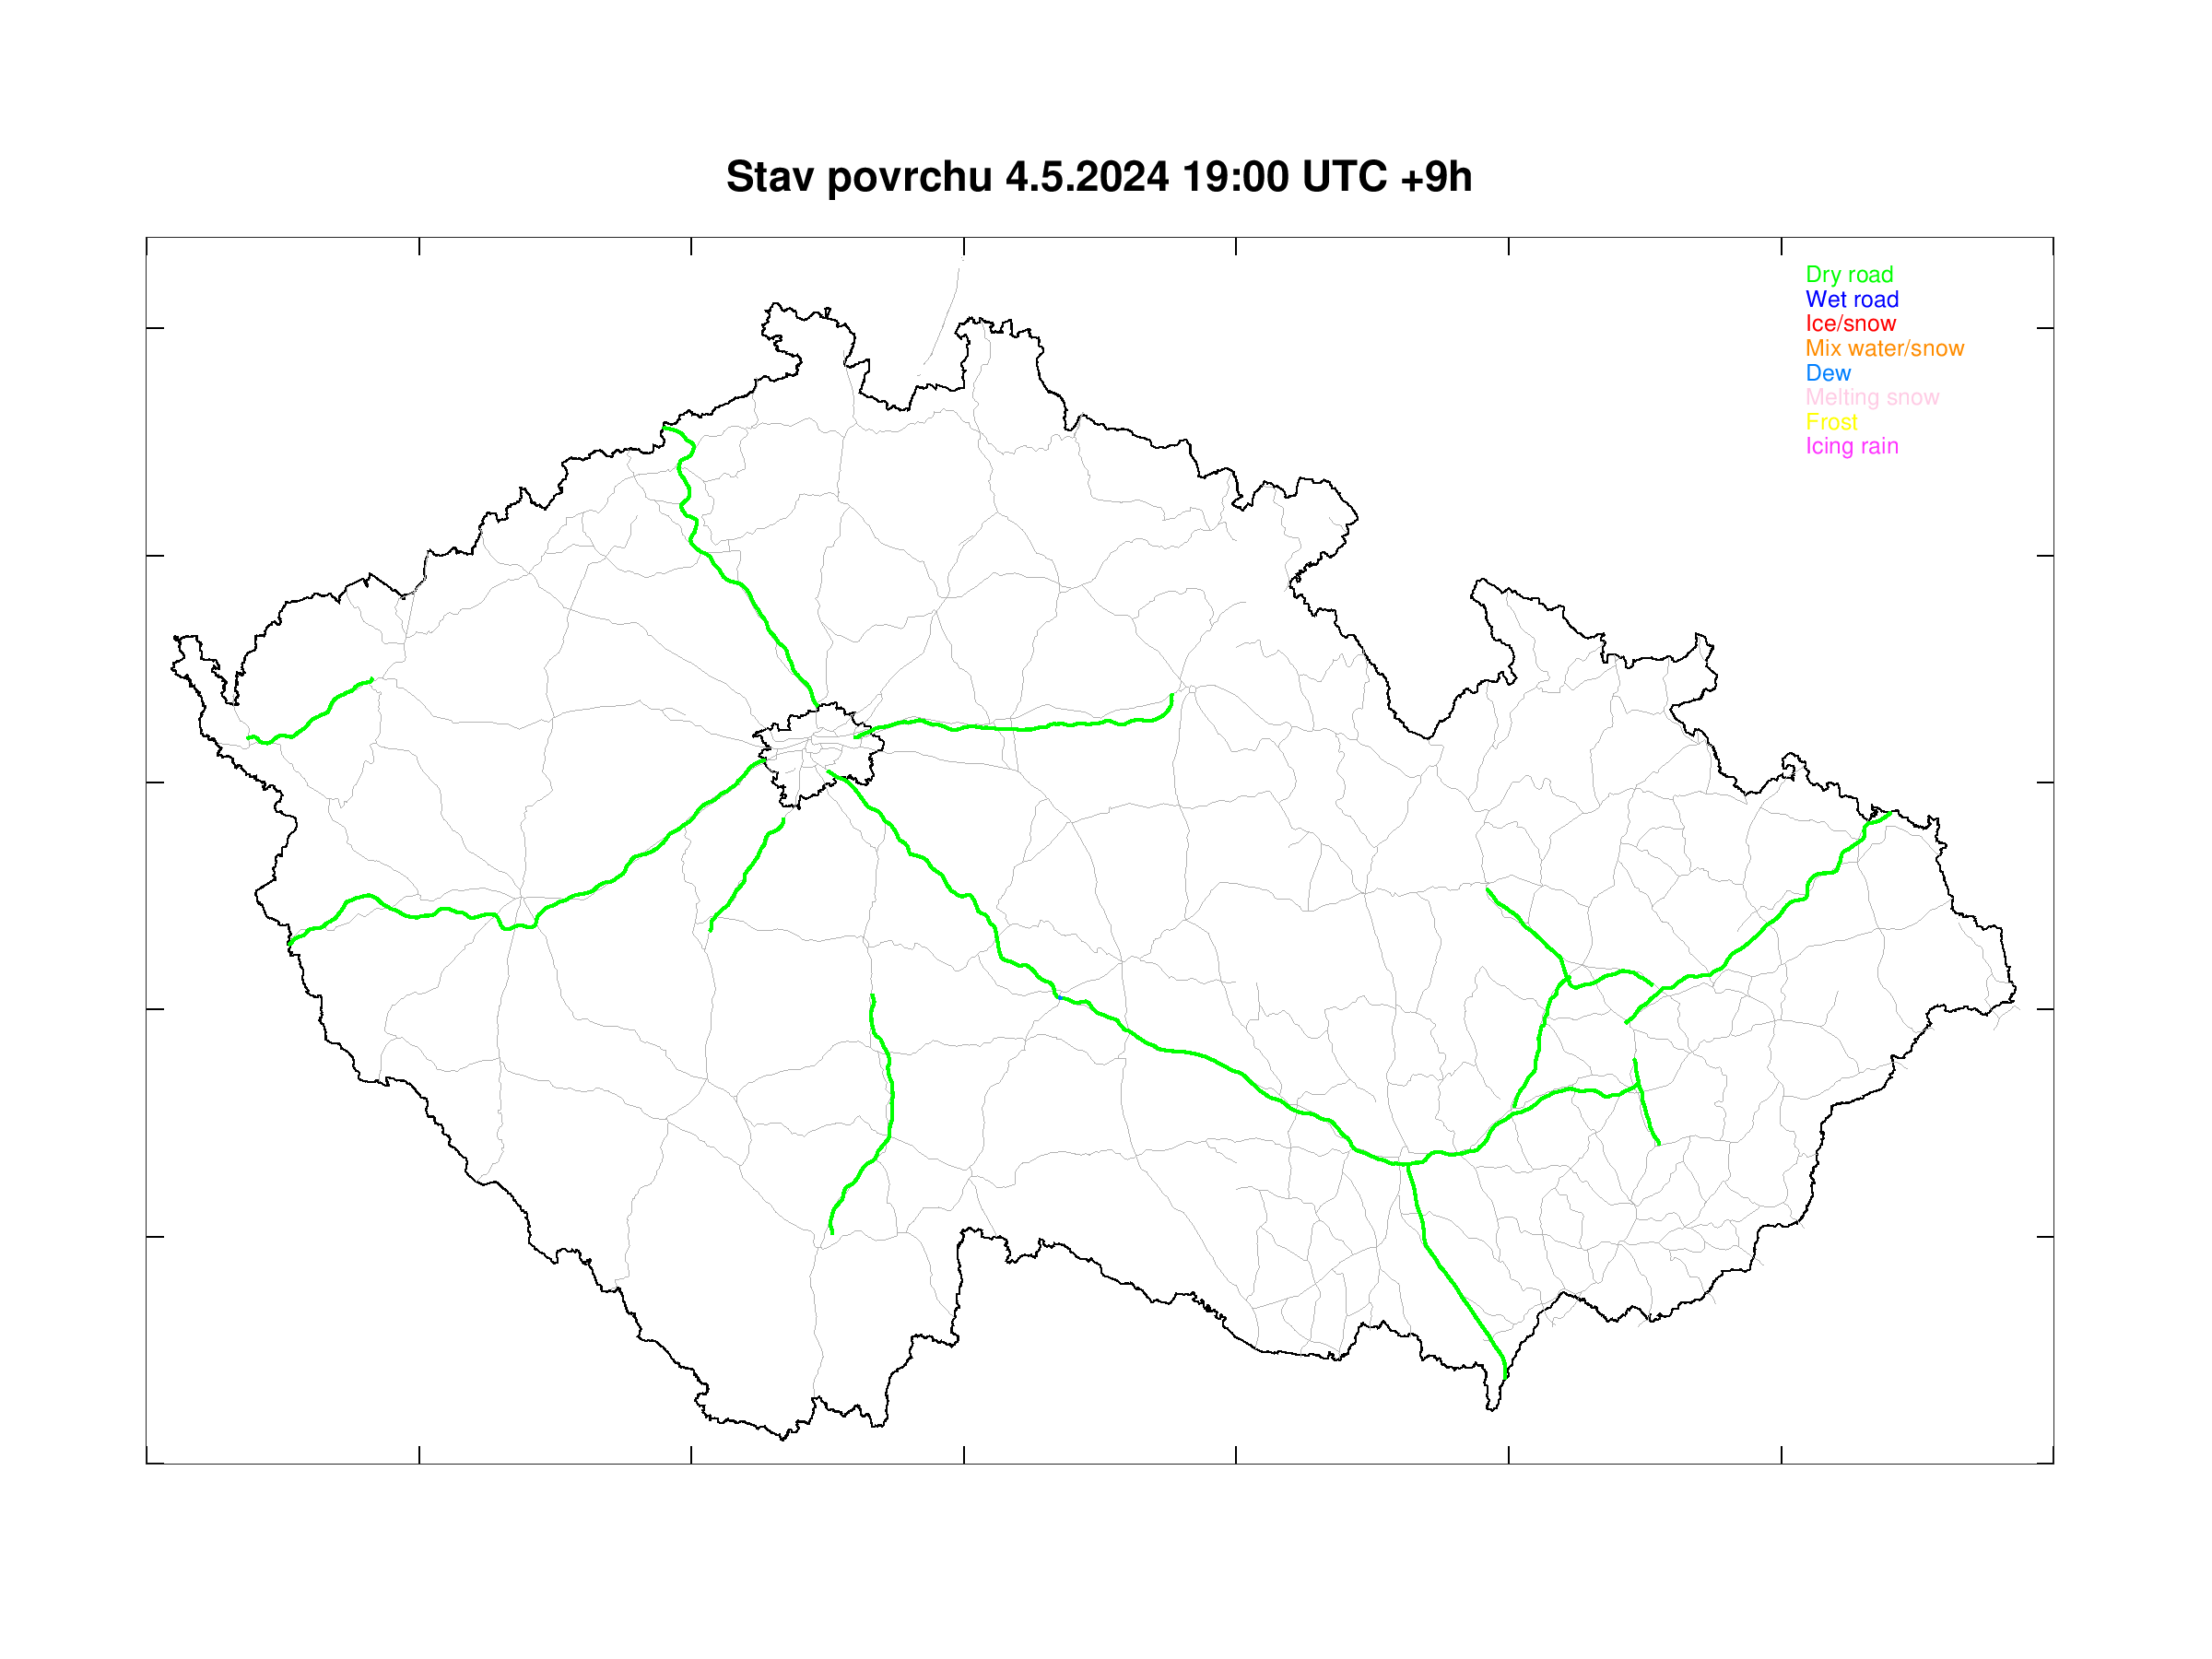 Road surface condition forecast for Czech highways +9h